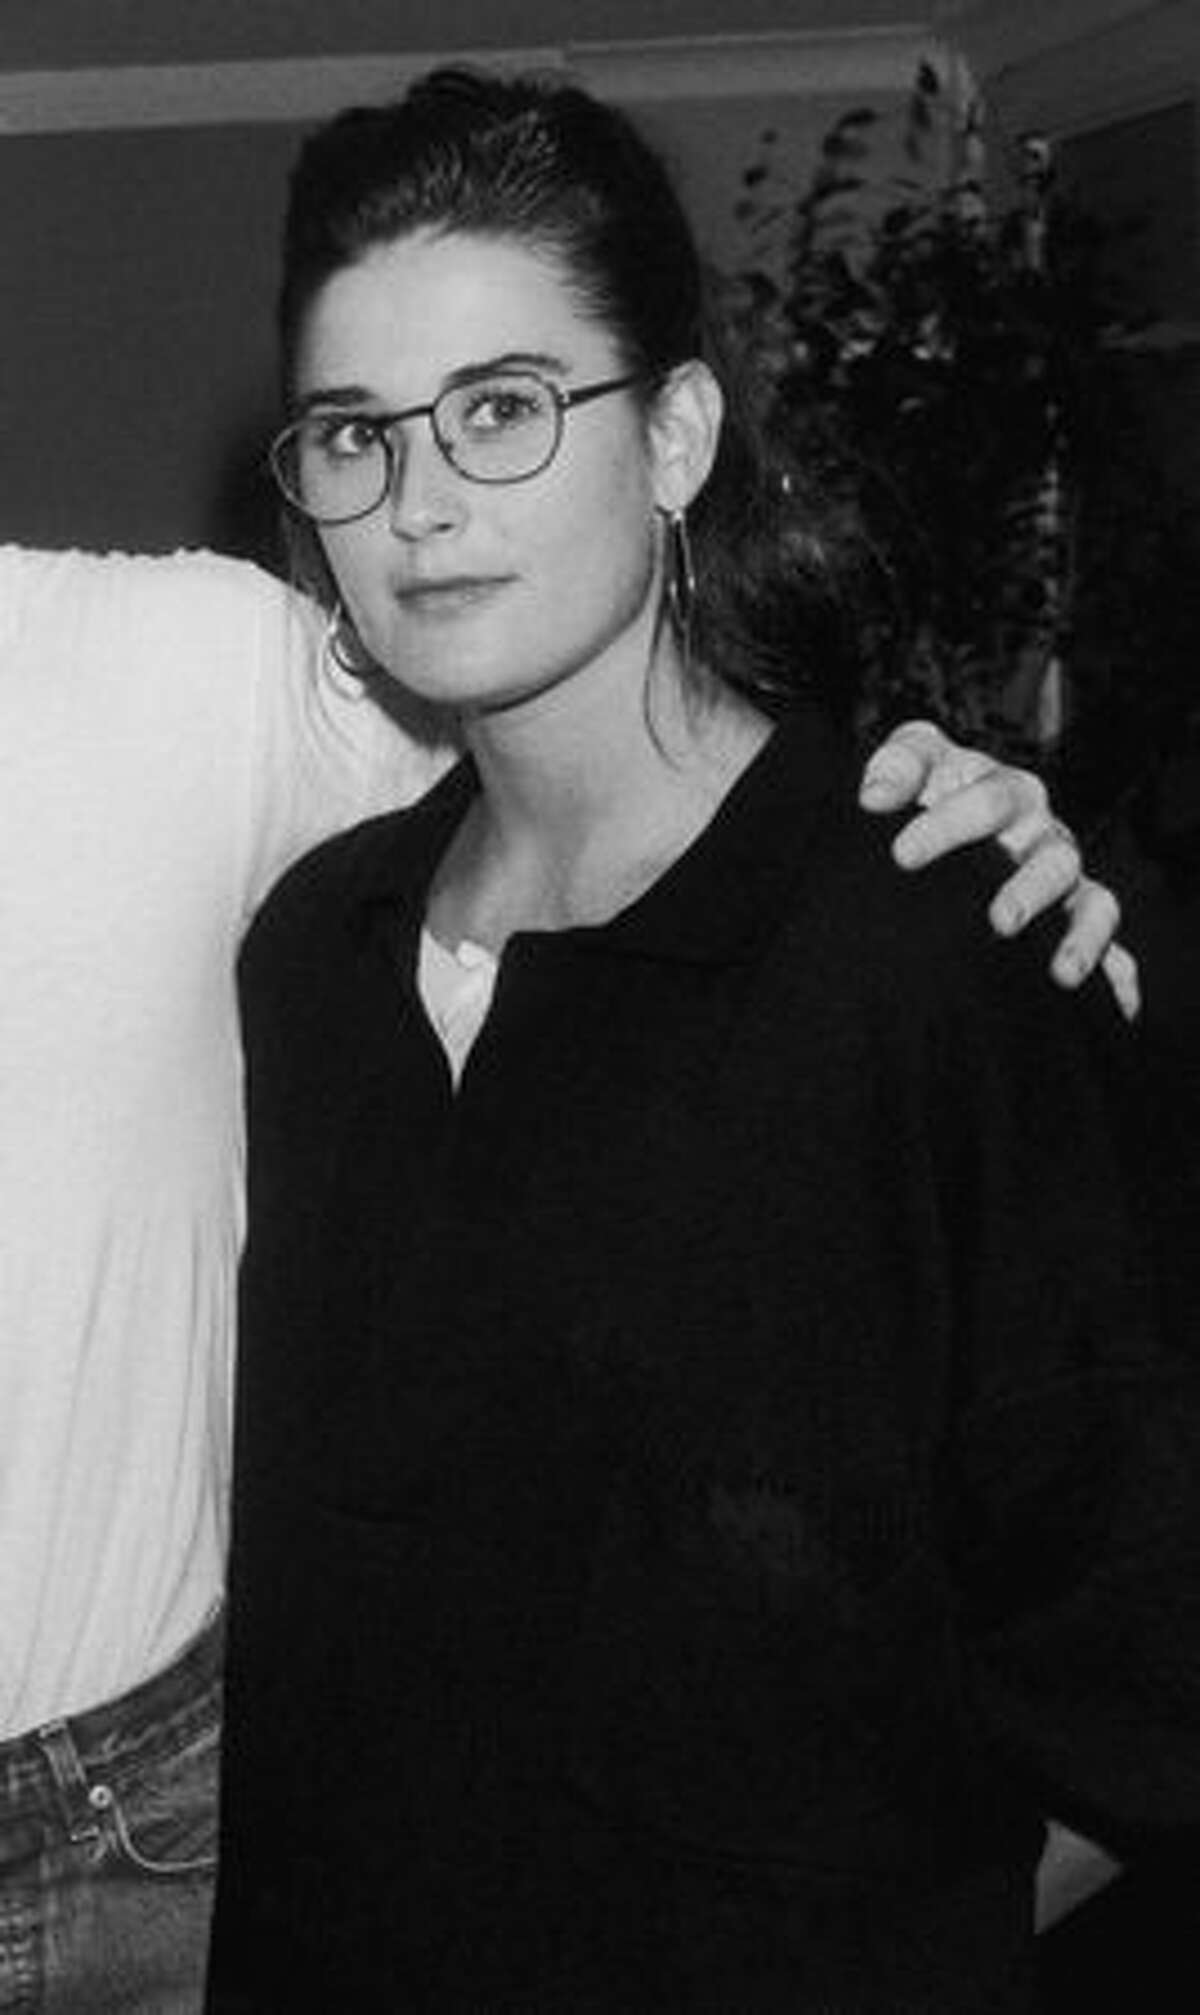 Born Demetria Gene Guynes, Demi Moore got her start as a model, before starring in '80s movies "Blame it on Rio, "St. Elmo's Fire" and "About Last Night..." She's pictured on June 5, 1987 at age 24.